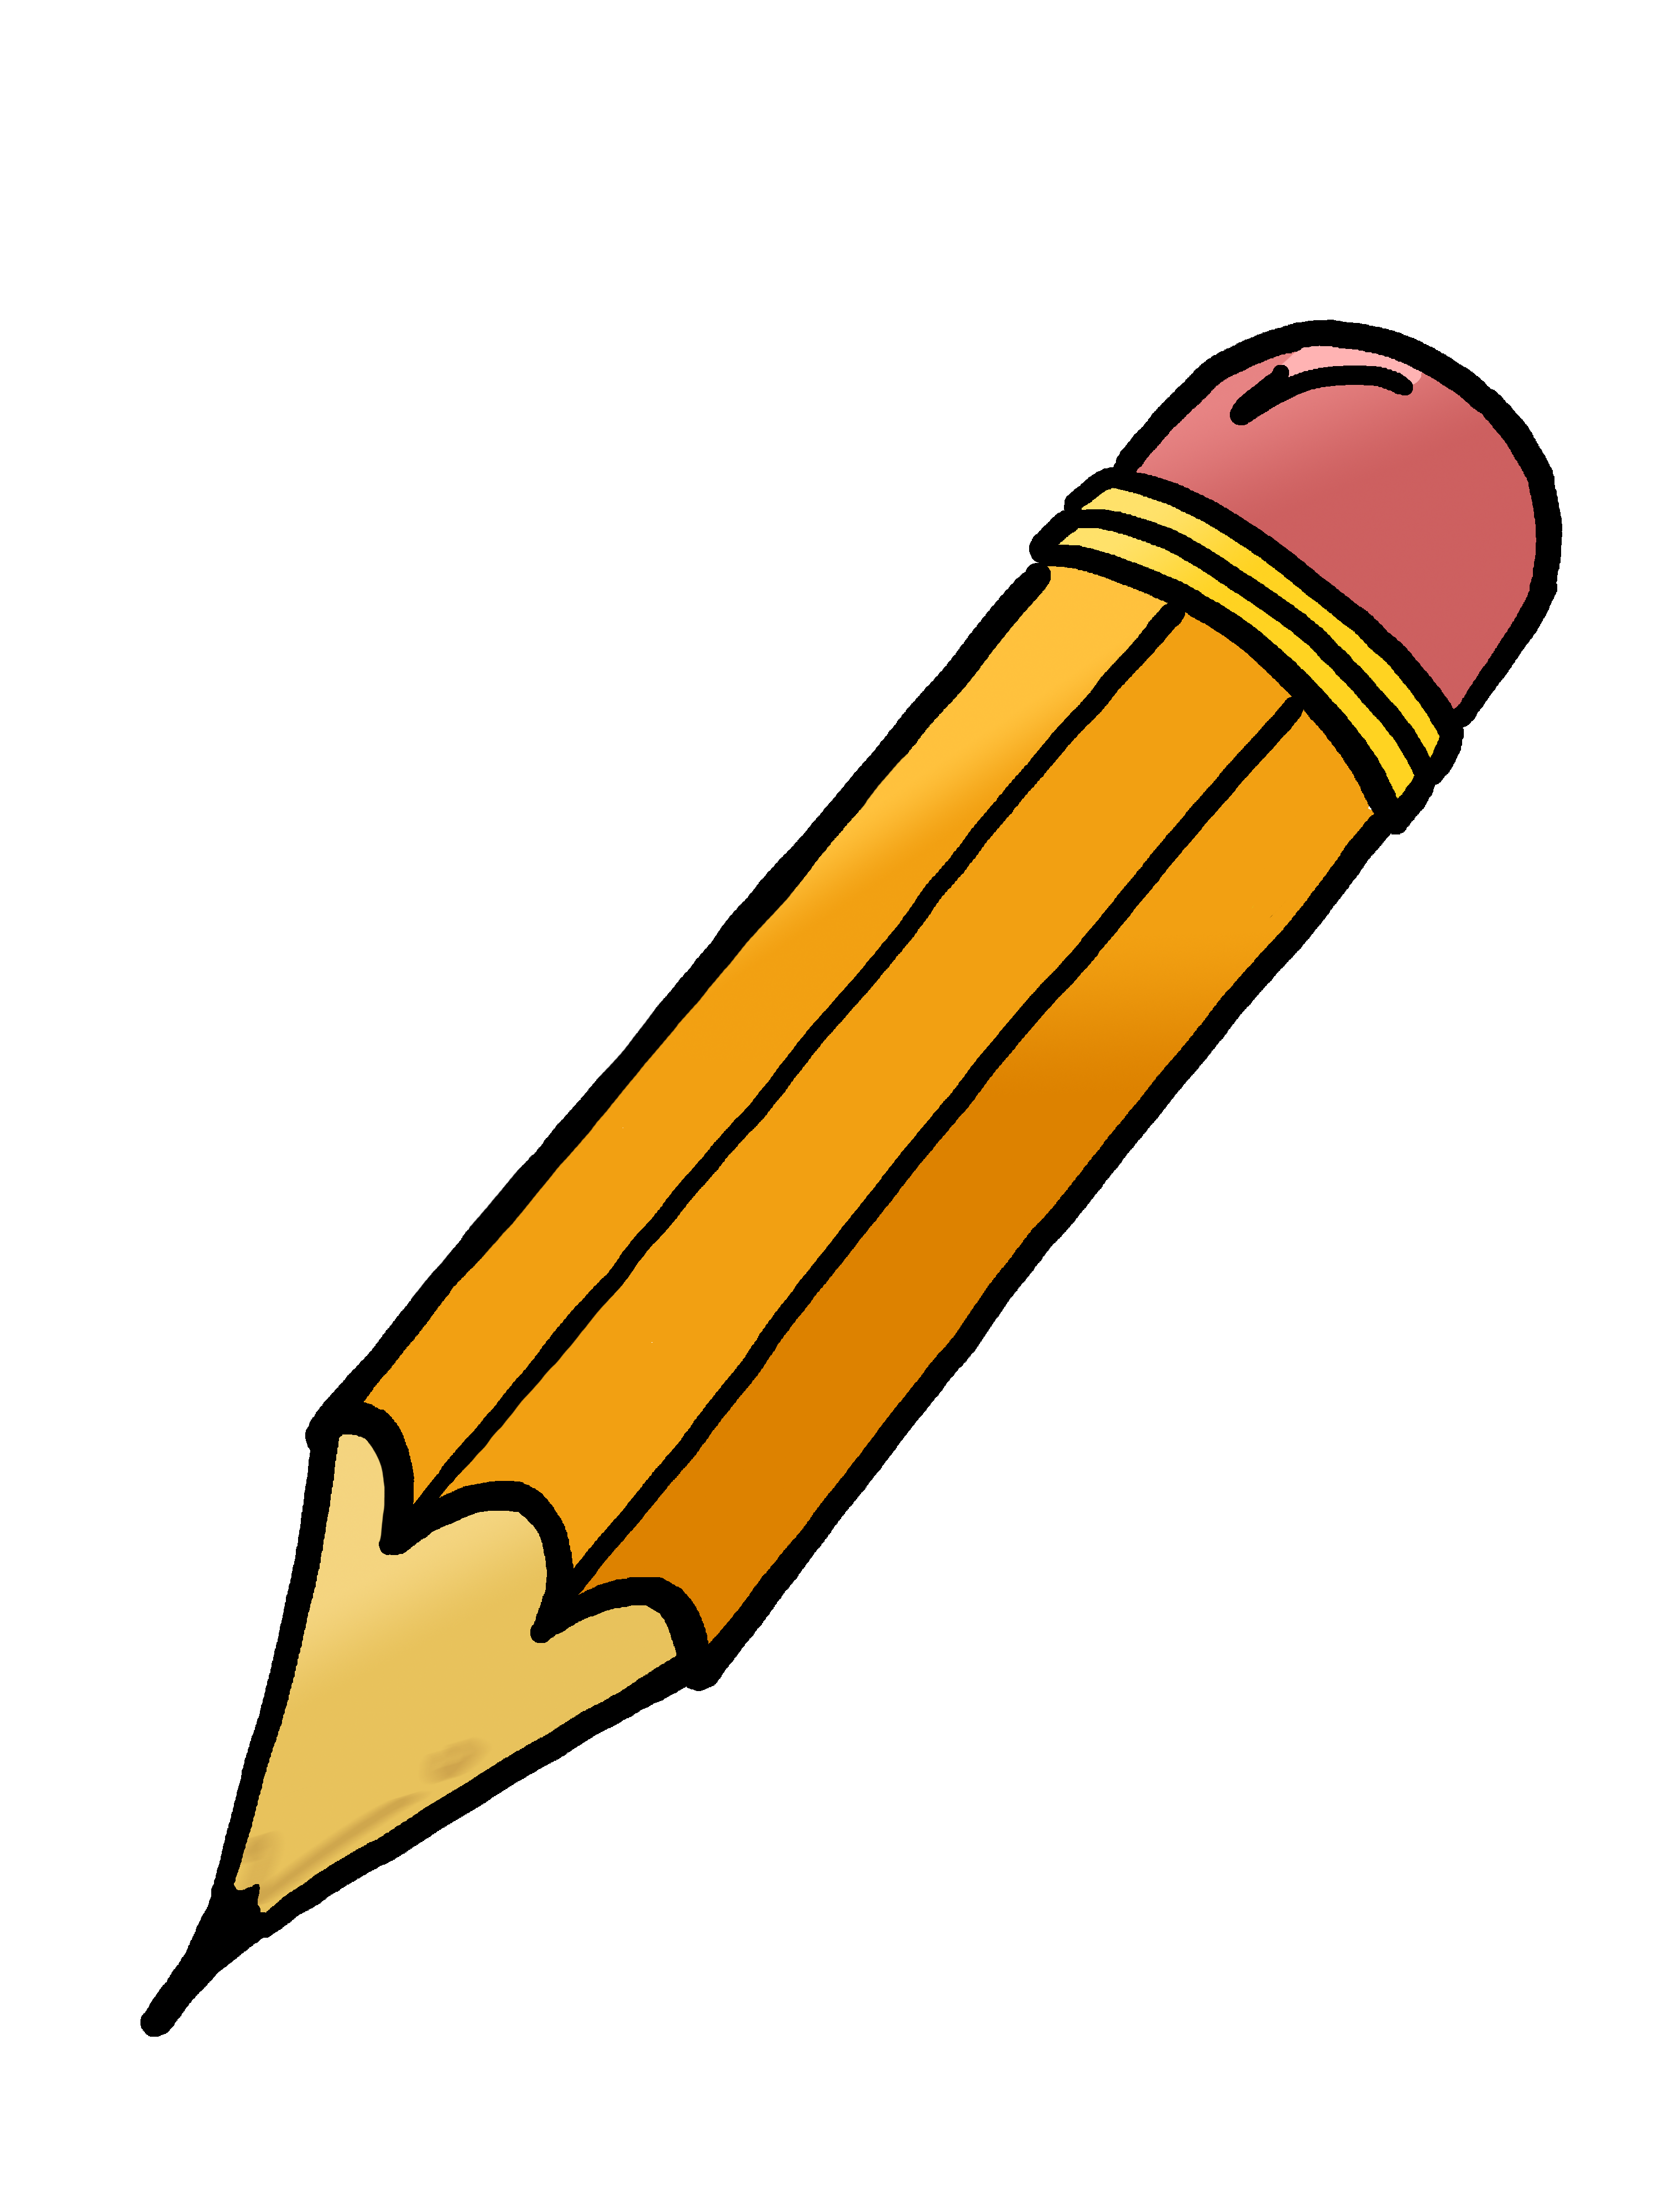 Free clipart image of pencil with no eraser black and white ...